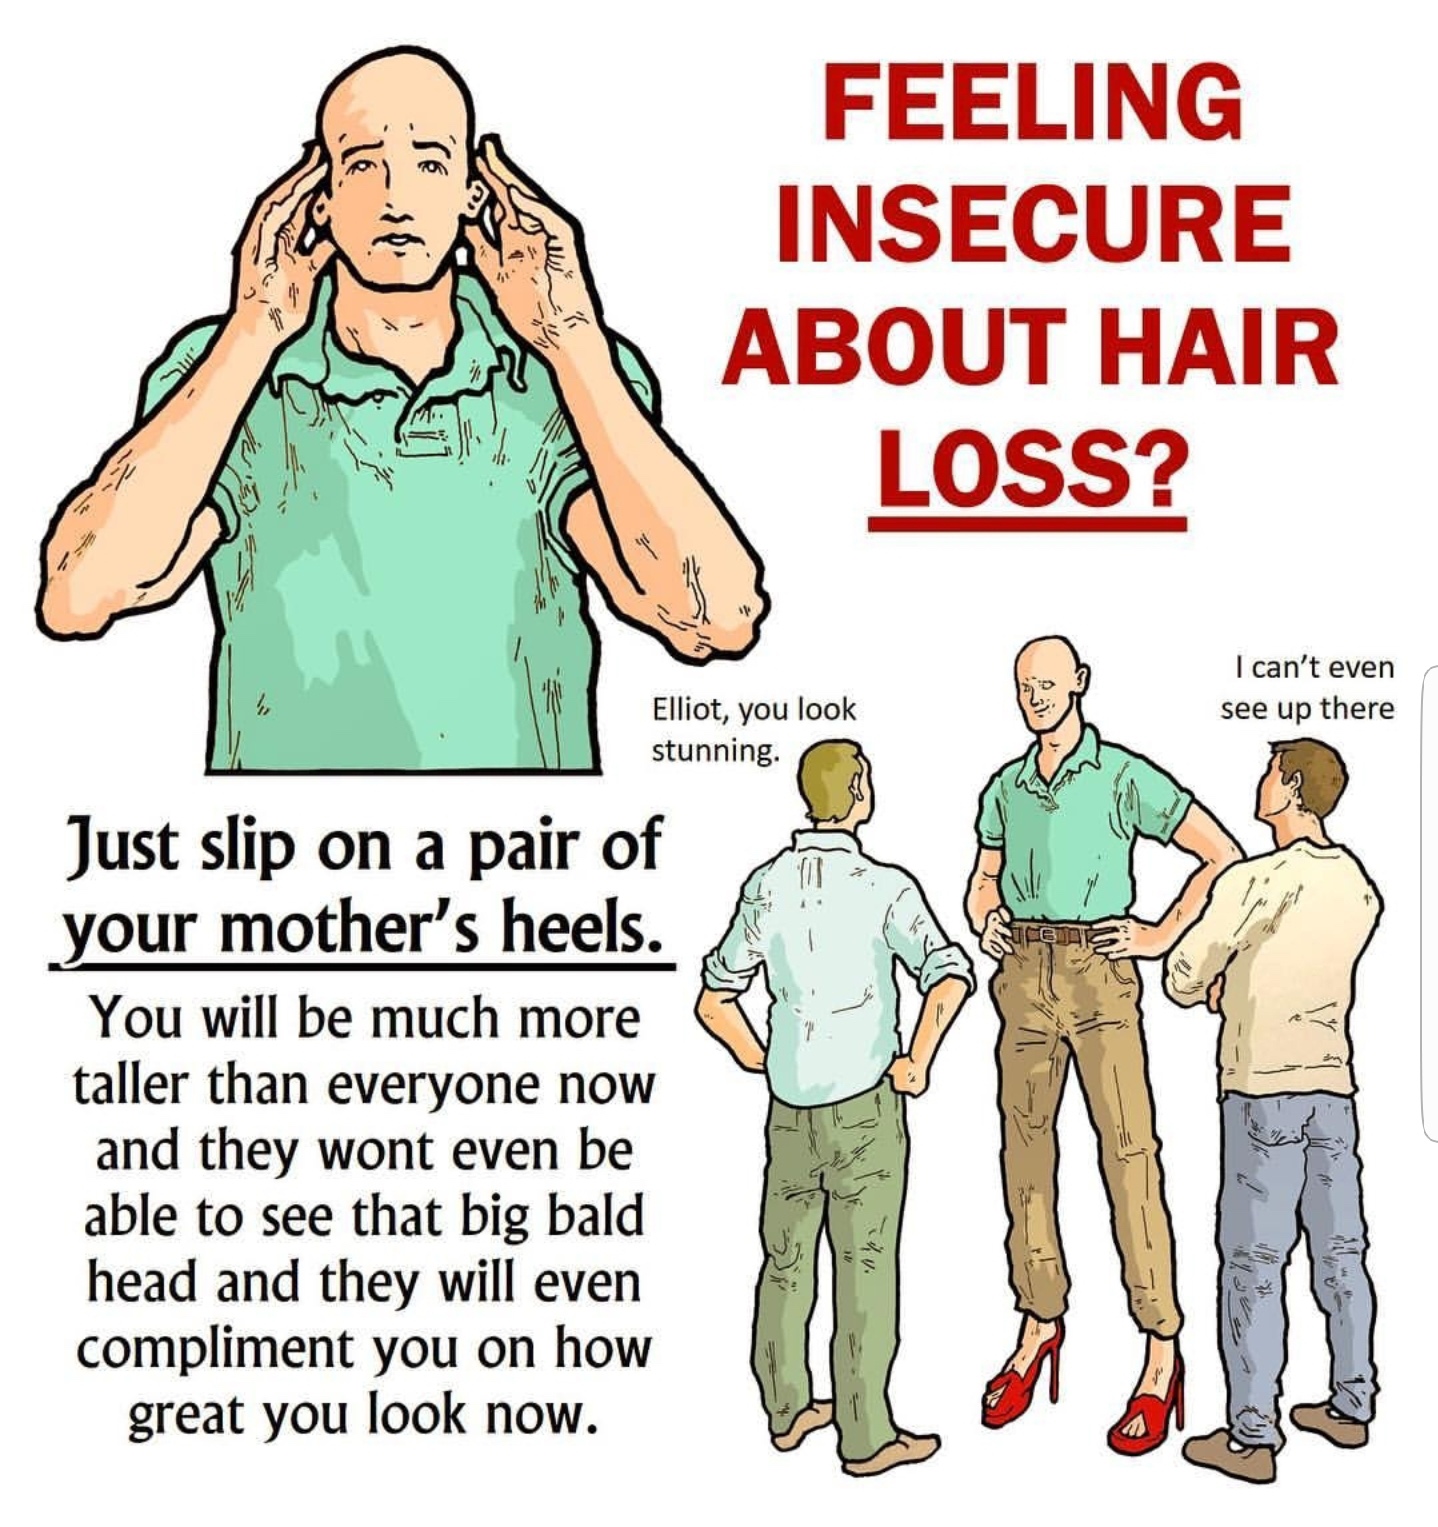 hair loss meme - Feeling Insecure About Hair Loss? I can't even see up there Elliot, you look stunning Just slip on a pair of your mother's heels. You will be much more taller than everyone now and they wont even be able to see that big bald head and they